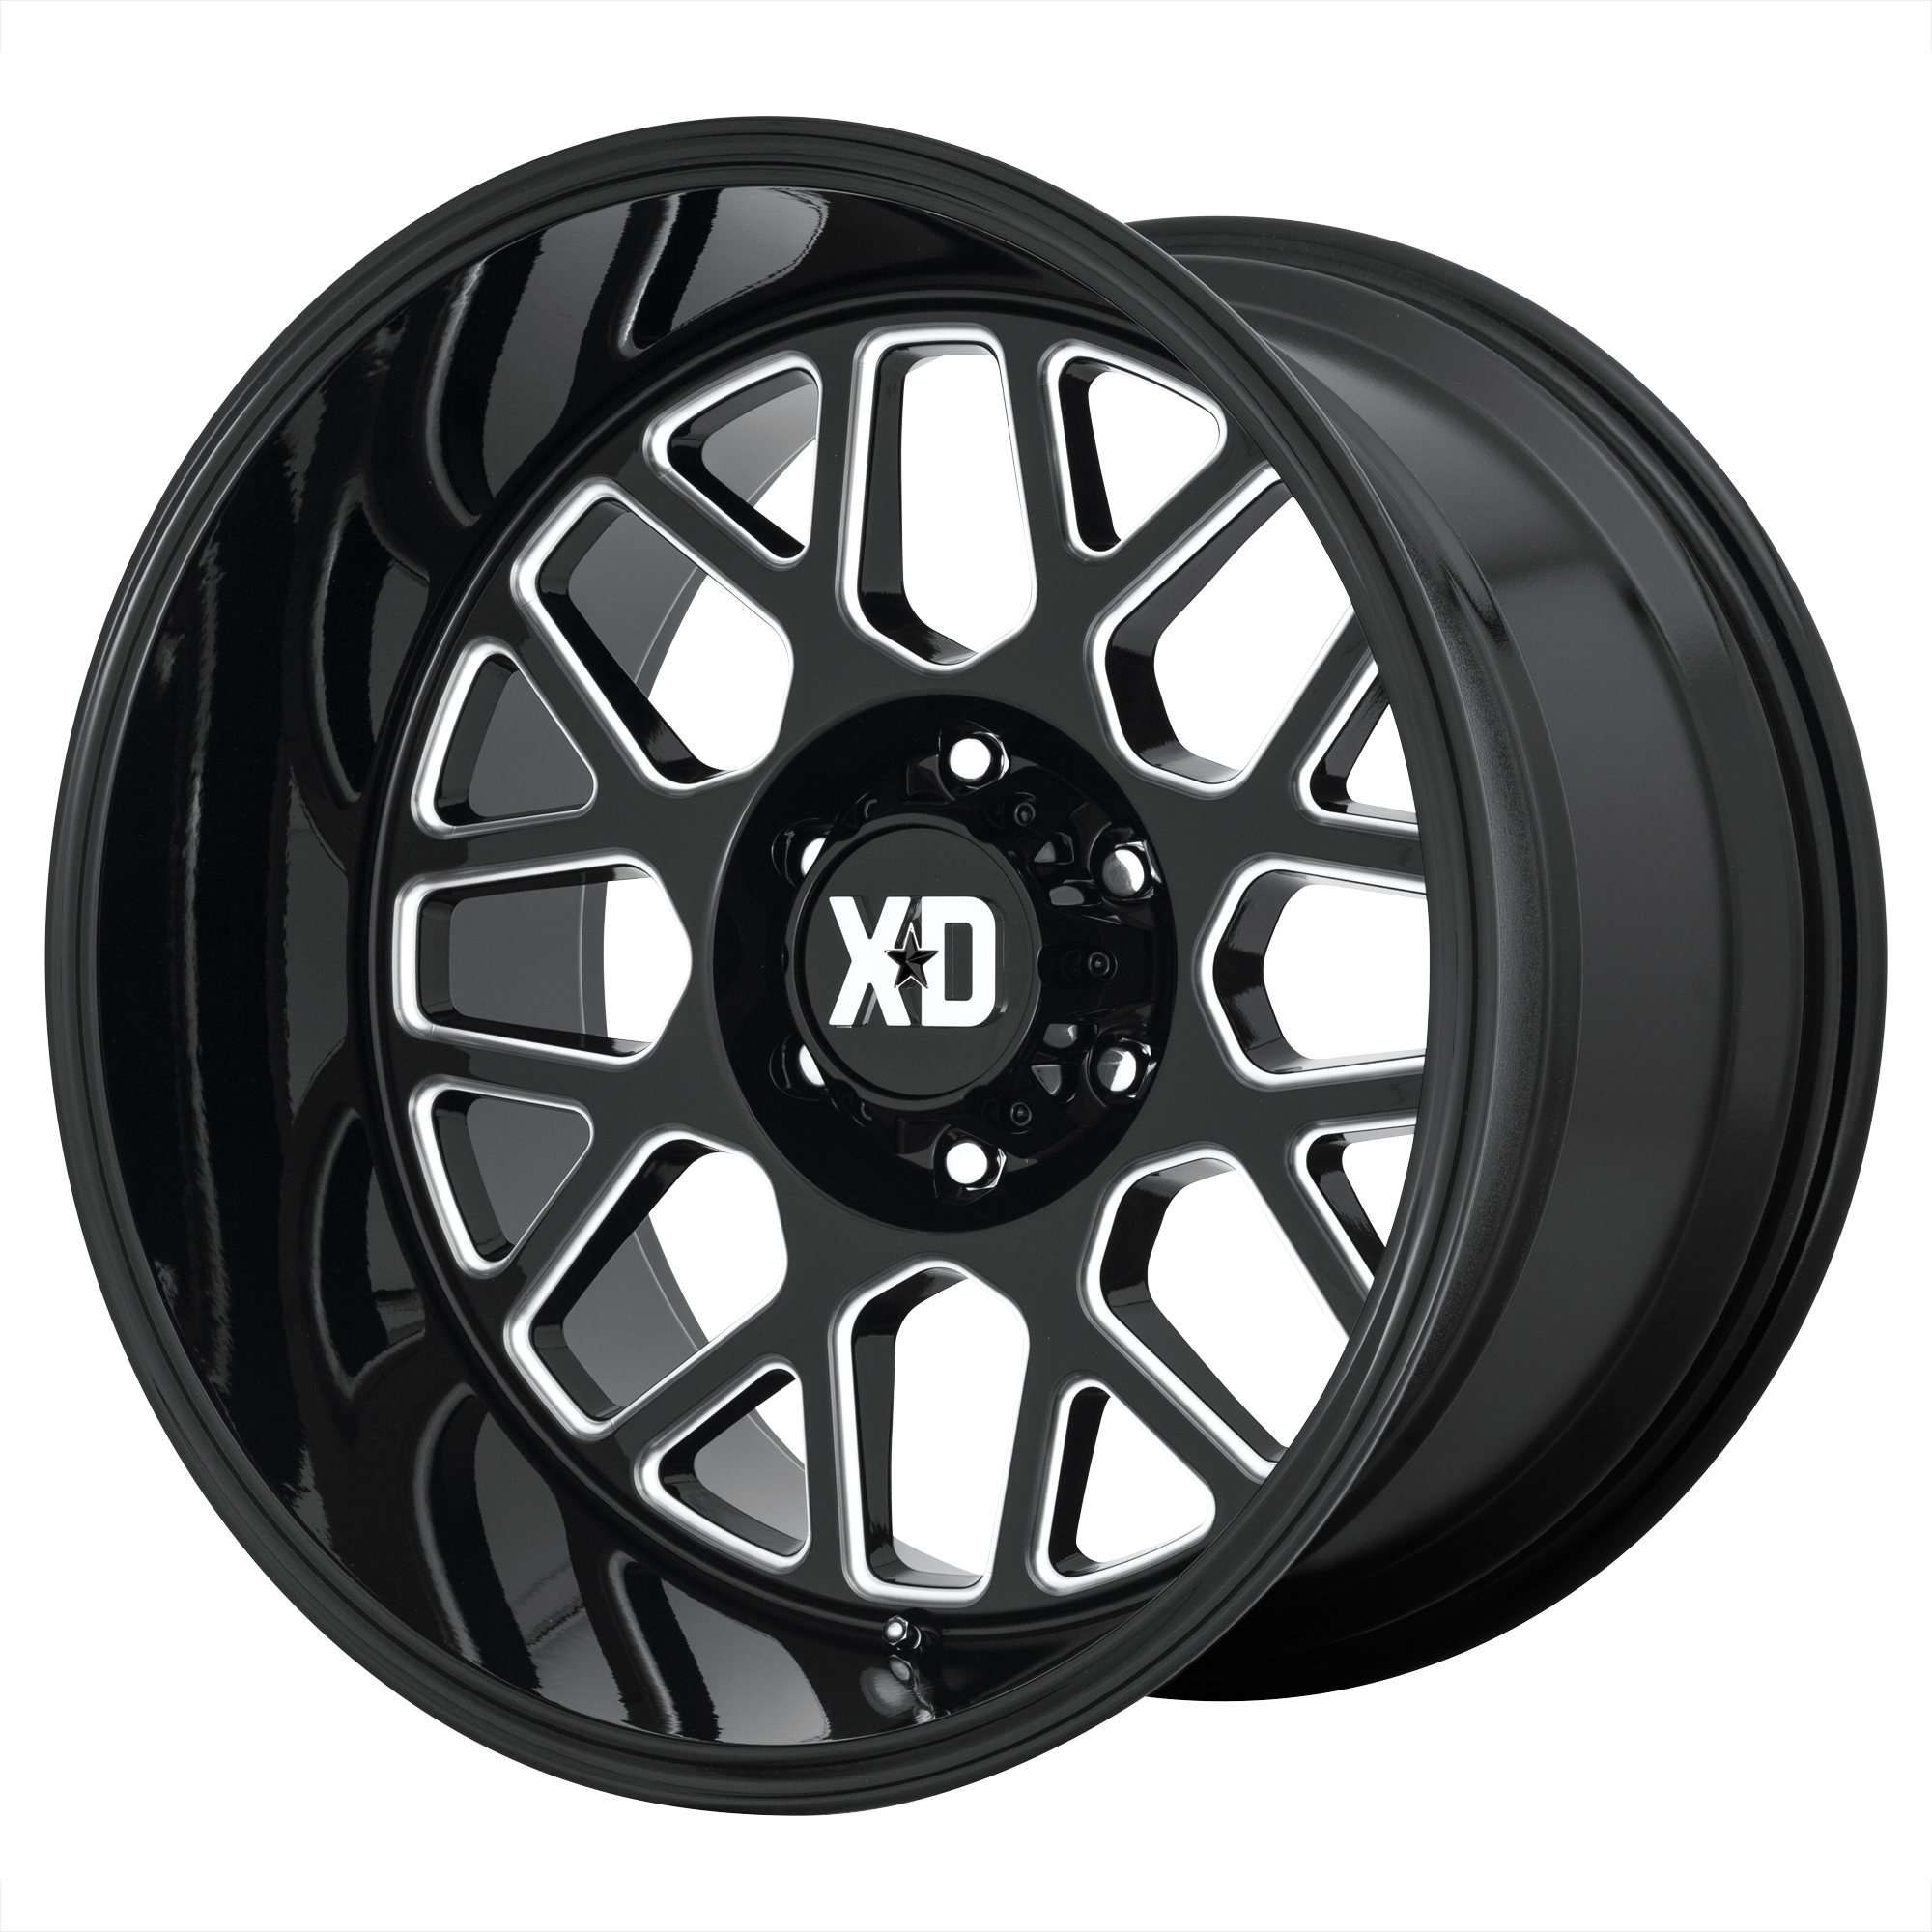 GRENADE 2 22x10 5x127.00 GLOSS BLACK MILLED (-18 mm) - Tires and Engine Performance